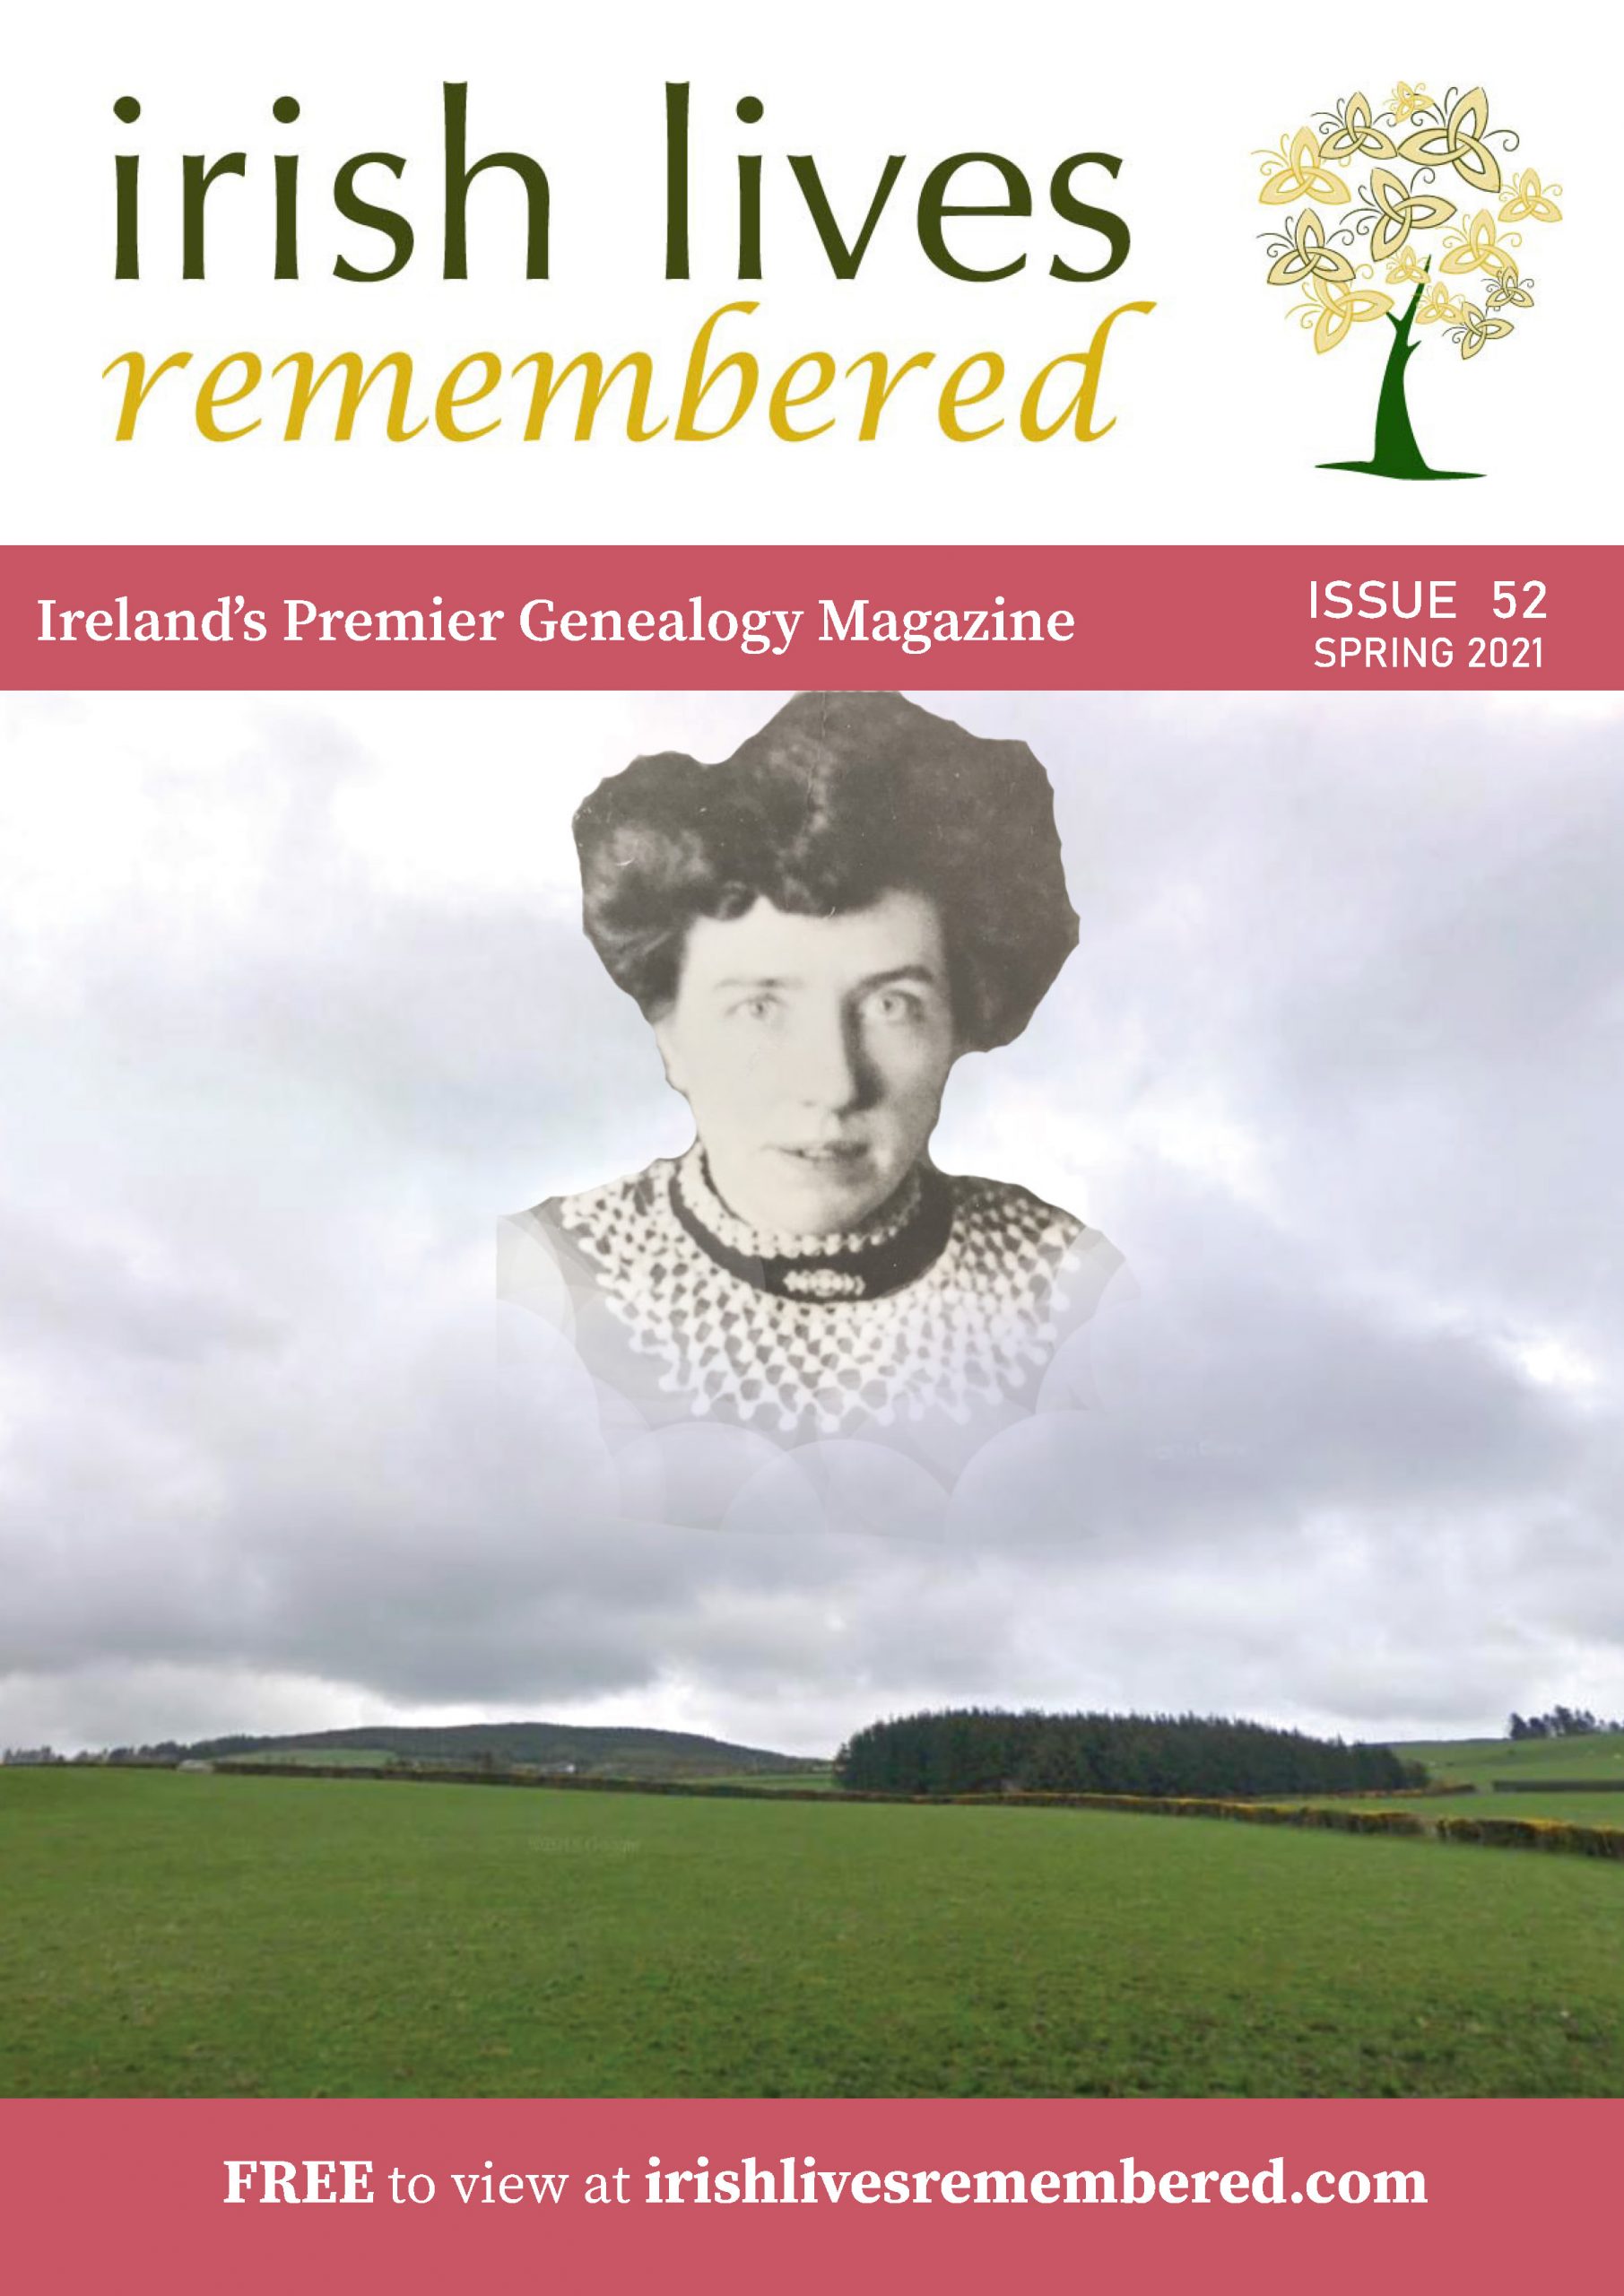 Irish Lives Remembered Issue 52 Spring 2021